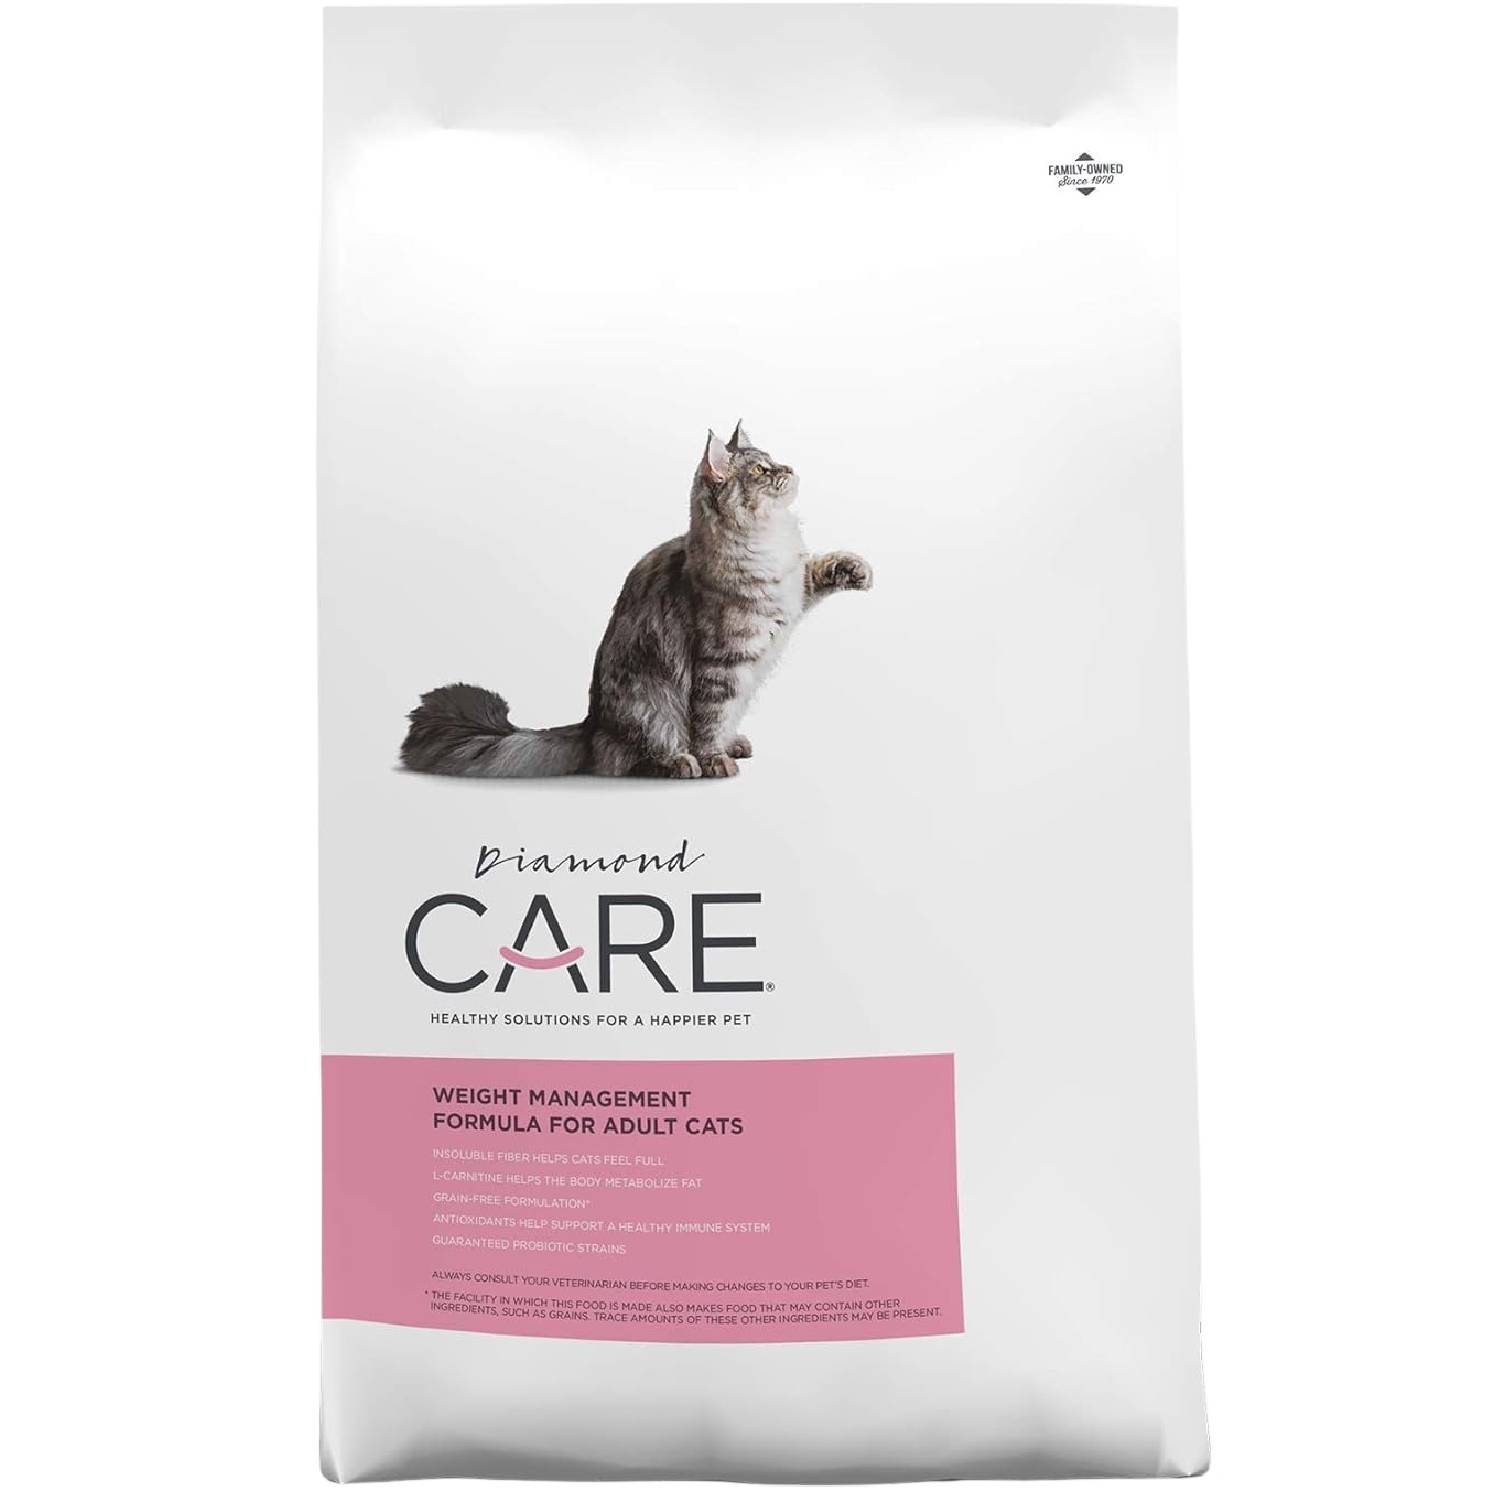 Diamond CARE Specialized Diets To Support Cats With Unique Health Issues